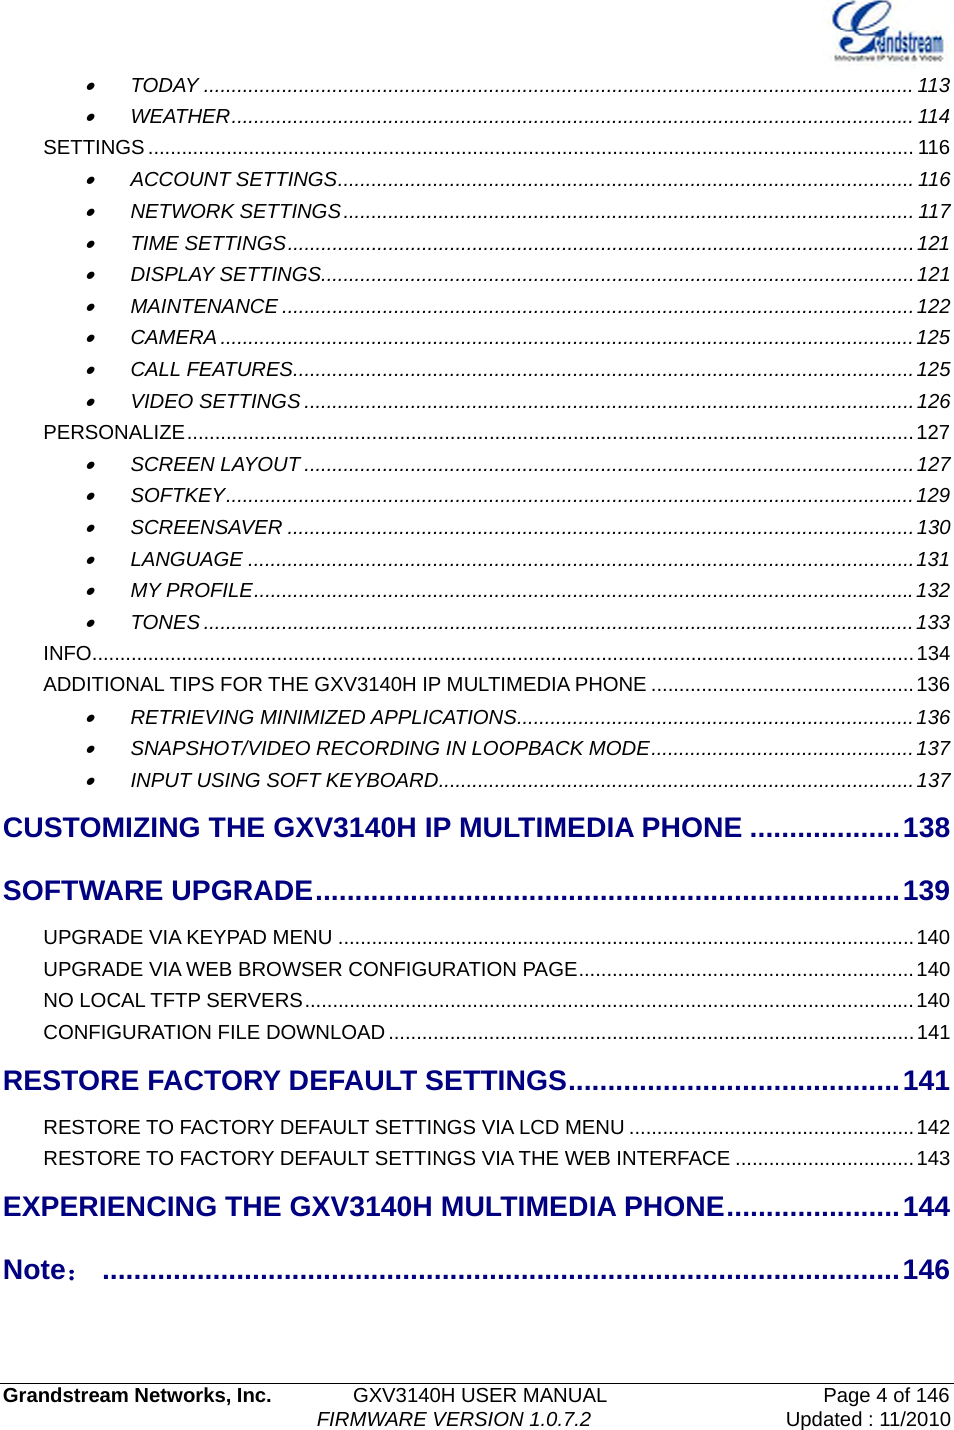   Grandstream Networks, Inc.        GXV3140H USER MANUAL                    Page 4 of 146                                FIRMWARE VERSION 1.0.7.2 Updated : 11/2010  • TODAY ............................................................................................................................... 113 • WEATHER.......................................................................................................................... 114 SETTINGS ......................................................................................................................................... 116 • ACCOUNT SETTINGS....................................................................................................... 116 • NETWORK SETTINGS...................................................................................................... 117 • TIME SETTINGS................................................................................................................121 • DISPLAY SETTINGS..........................................................................................................121 • MAINTENANCE .................................................................................................................122 • CAMERA ............................................................................................................................125 • CALL FEATURES...............................................................................................................125 • VIDEO SETTINGS .............................................................................................................126 PERSONALIZE..................................................................................................................................127 • SCREEN LAYOUT .............................................................................................................127 • SOFTKEY...........................................................................................................................129 • SCREENSAVER ................................................................................................................130 • LANGUAGE .......................................................................................................................131 • MY PROFILE......................................................................................................................132 • TONES ...............................................................................................................................133 INFO...................................................................................................................................................134 ADDITIONAL TIPS FOR THE GXV3140H IP MULTIMEDIA PHONE ...............................................136 • RETRIEVING MINIMIZED APPLICATIONS.......................................................................136 • SNAPSHOT/VIDEO RECORDING IN LOOPBACK MODE...............................................137 • INPUT USING SOFT KEYBOARD.....................................................................................137 CUSTOMIZING THE GXV3140H IP MULTIMEDIA PHONE ...................138 SOFTWARE UPGRADE..........................................................................139 UPGRADE VIA KEYPAD MENU .......................................................................................................140 UPGRADE VIA WEB BROWSER CONFIGURATION PAGE............................................................140 NO LOCAL TFTP SERVERS.............................................................................................................140 CONFIGURATION FILE DOWNLOAD..............................................................................................141 RESTORE FACTORY DEFAULT SETTINGS..........................................141 RESTORE TO FACTORY DEFAULT SETTINGS VIA LCD MENU ...................................................142 RESTORE TO FACTORY DEFAULT SETTINGS VIA THE WEB INTERFACE ................................143 EXPERIENCING THE GXV3140H MULTIMEDIA PHONE......................144 Note：.....................................................................................................146  